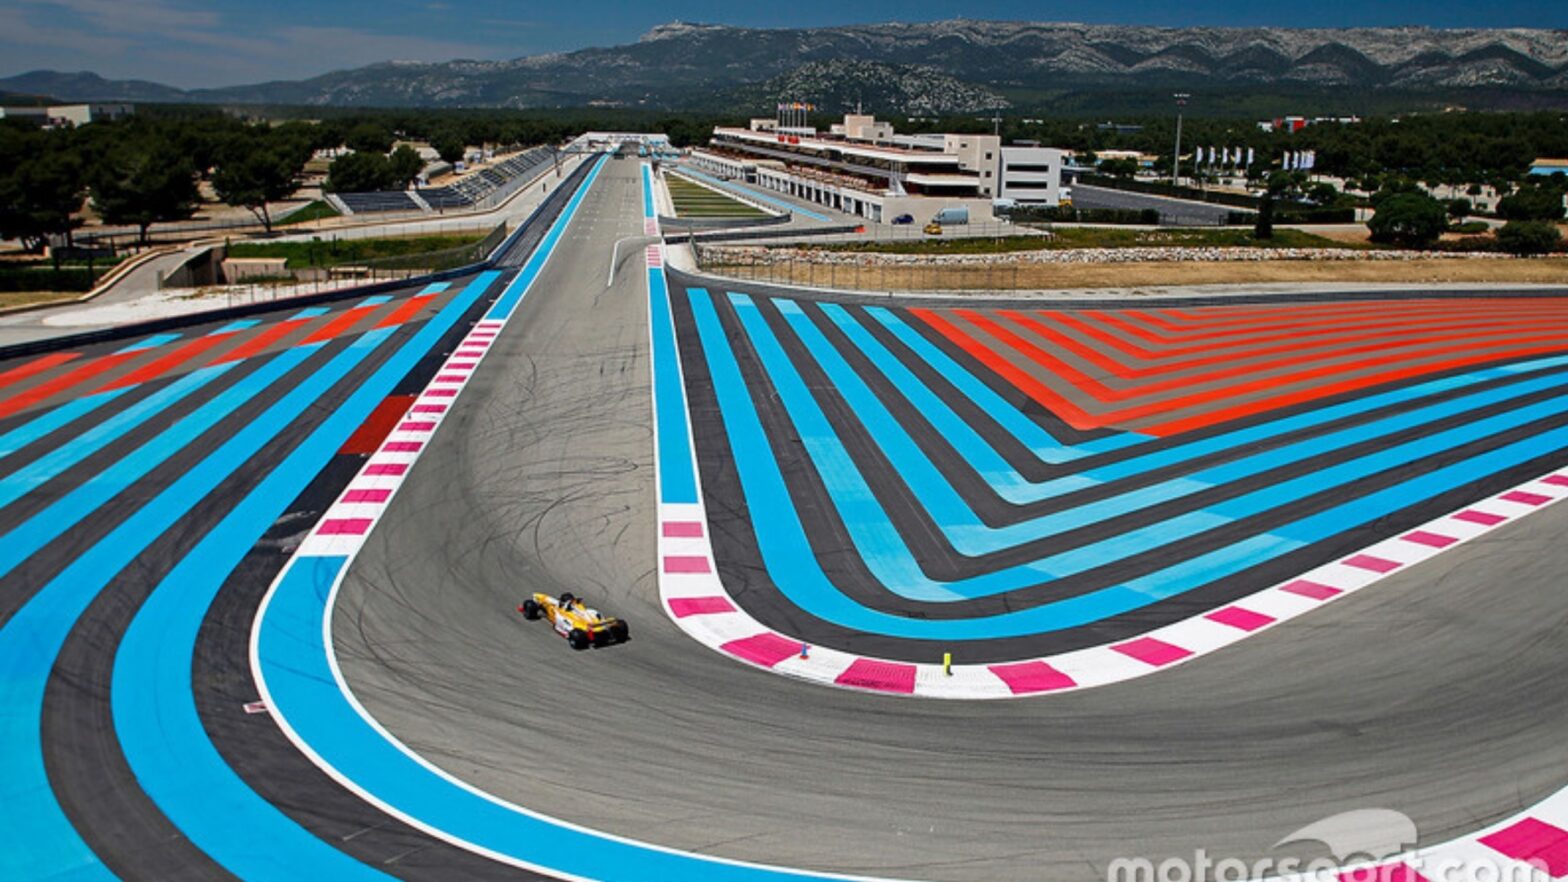 French GP News: Controversial Exit Kerbs Remain Unchanged Despite Teams’ Request